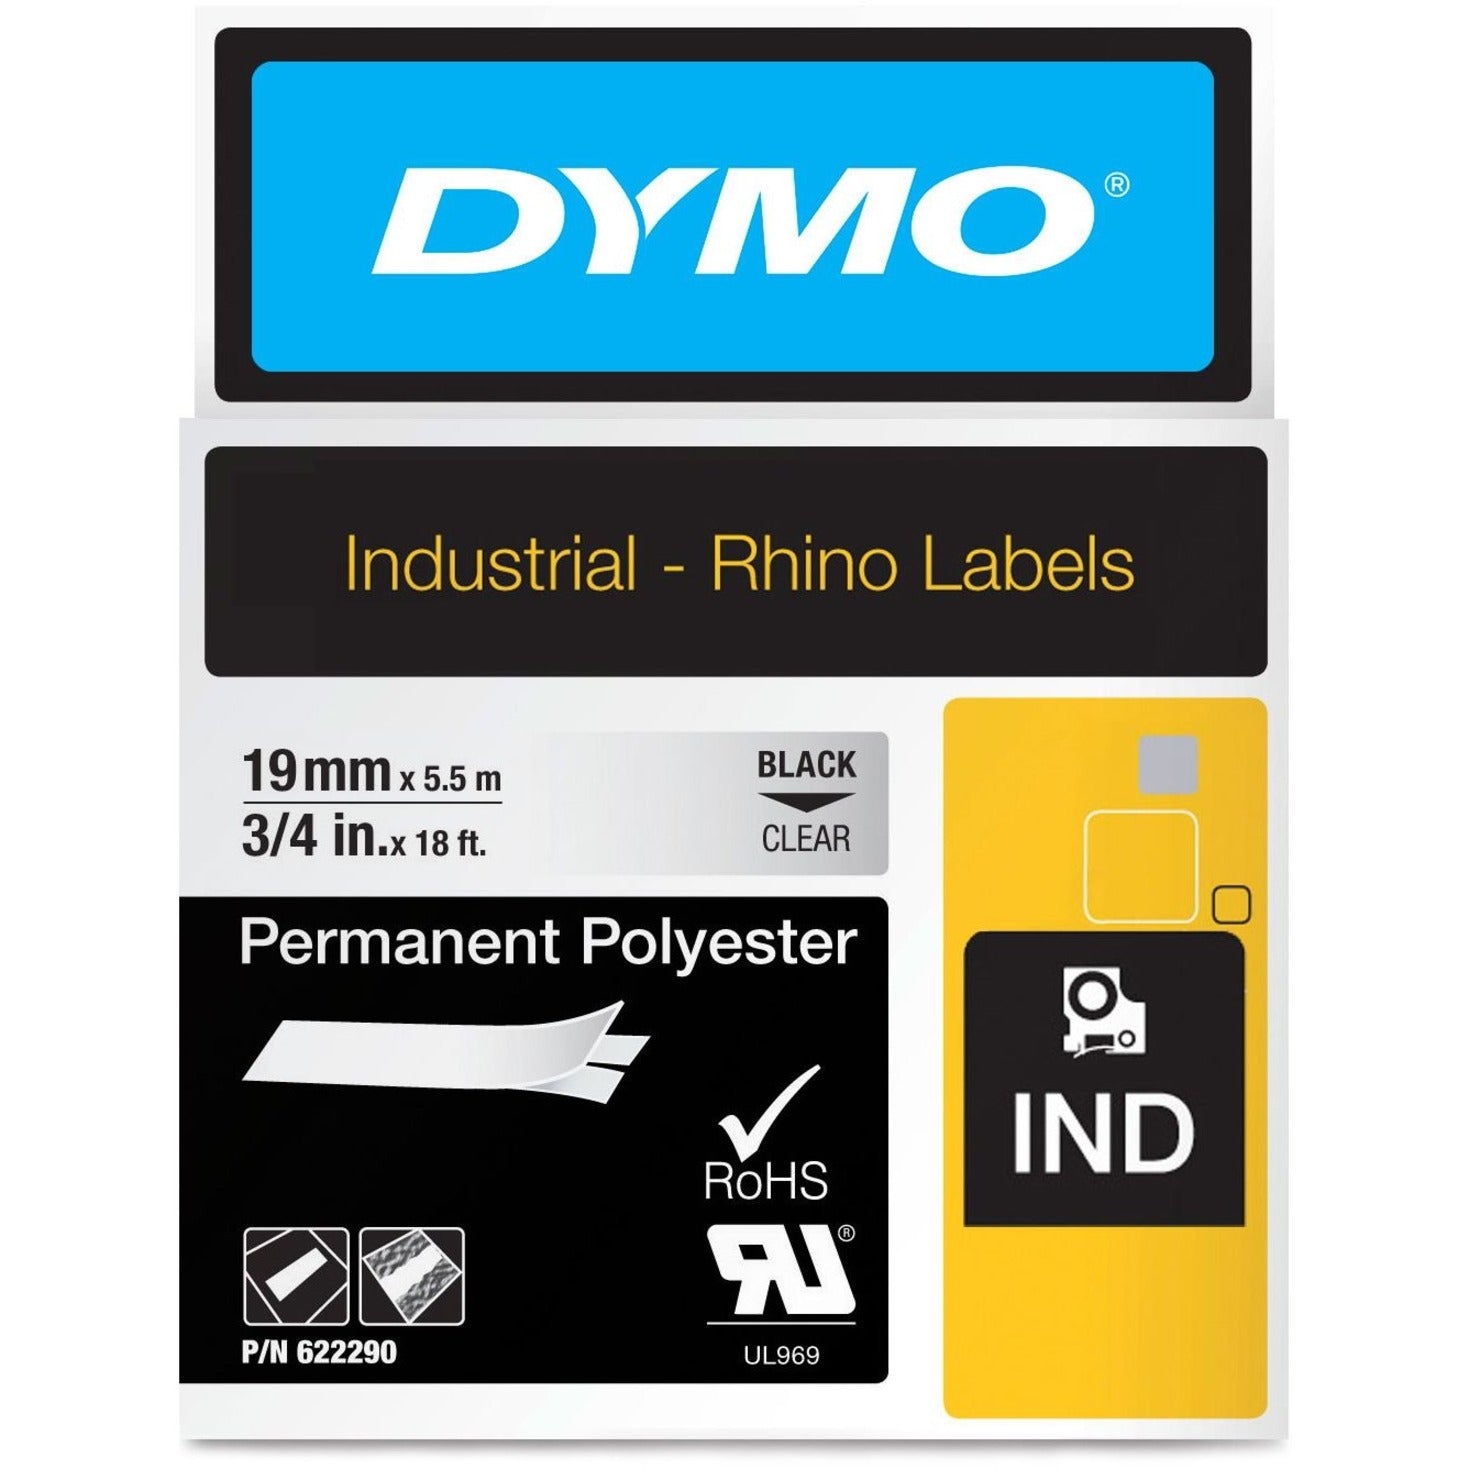 Dymo 622290 RhinoPro Thermal Label, Multipurpose Label, 3/4" x 18 ft, Permanent Adhesive, Clear Polyester